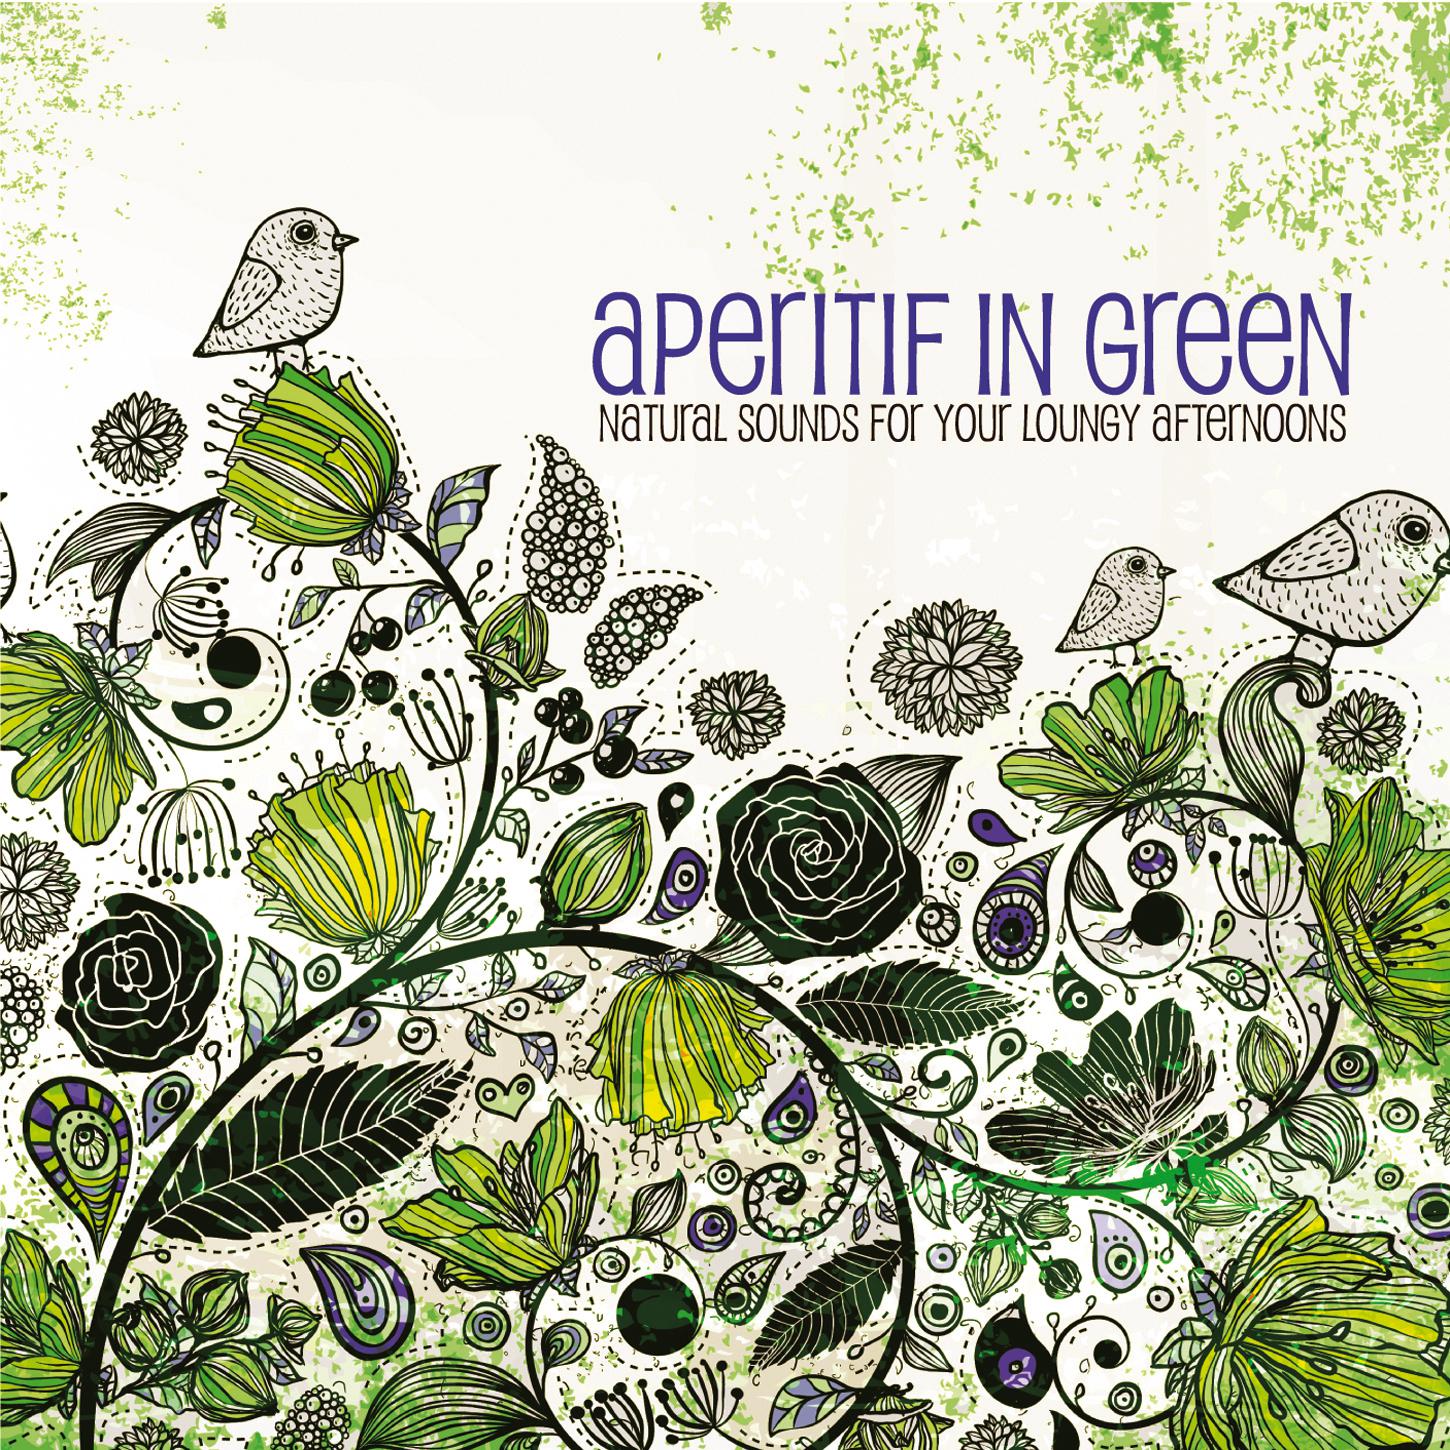 Aperitif in Green (Natural Sounds for Your Loungy Afternoons)